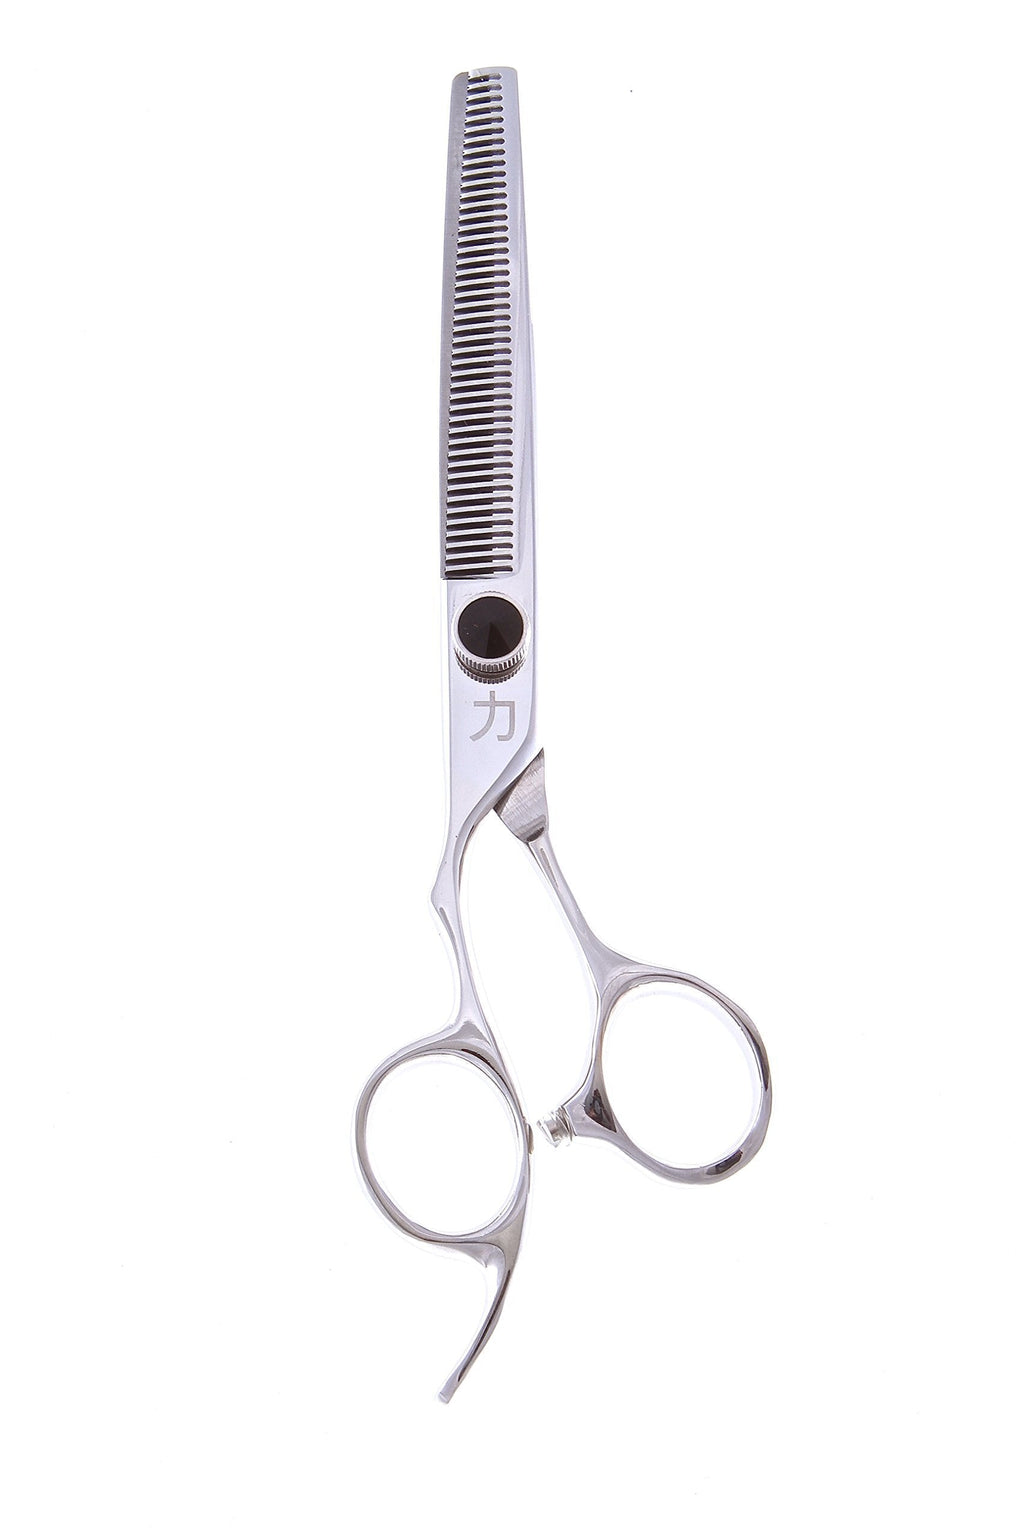 [Australia] - ShearsDirect 45 Tooth Left Handed Blending Shear with Ergonomic Off Set Handle Design, 6.5-Inch 